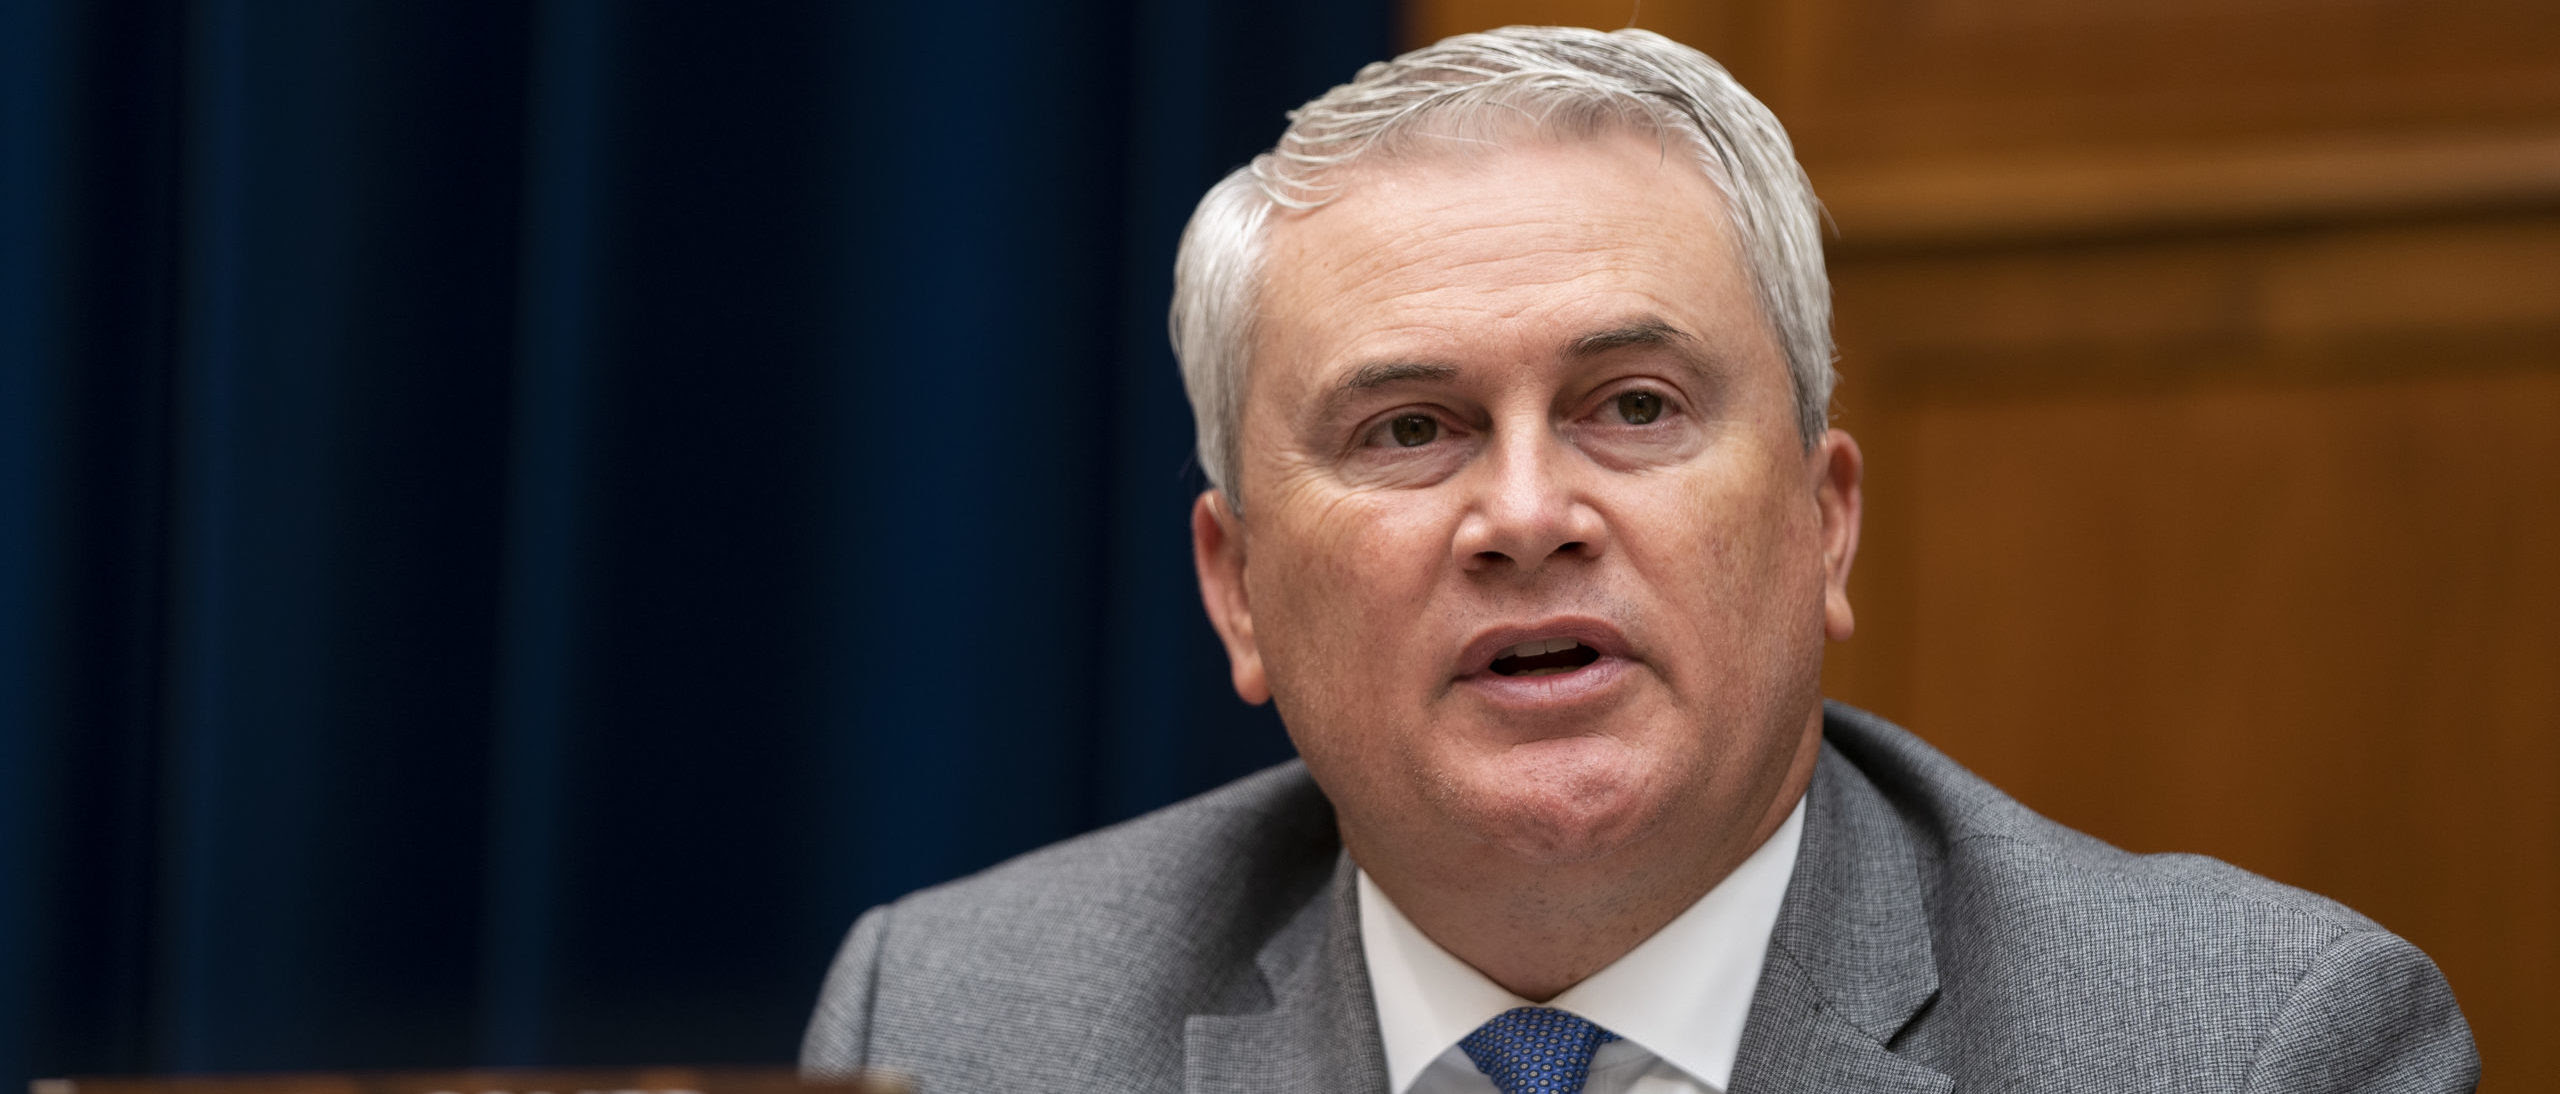 Rep. James Comer Demands Answers On Biden Administration’s Response To Border Crisis